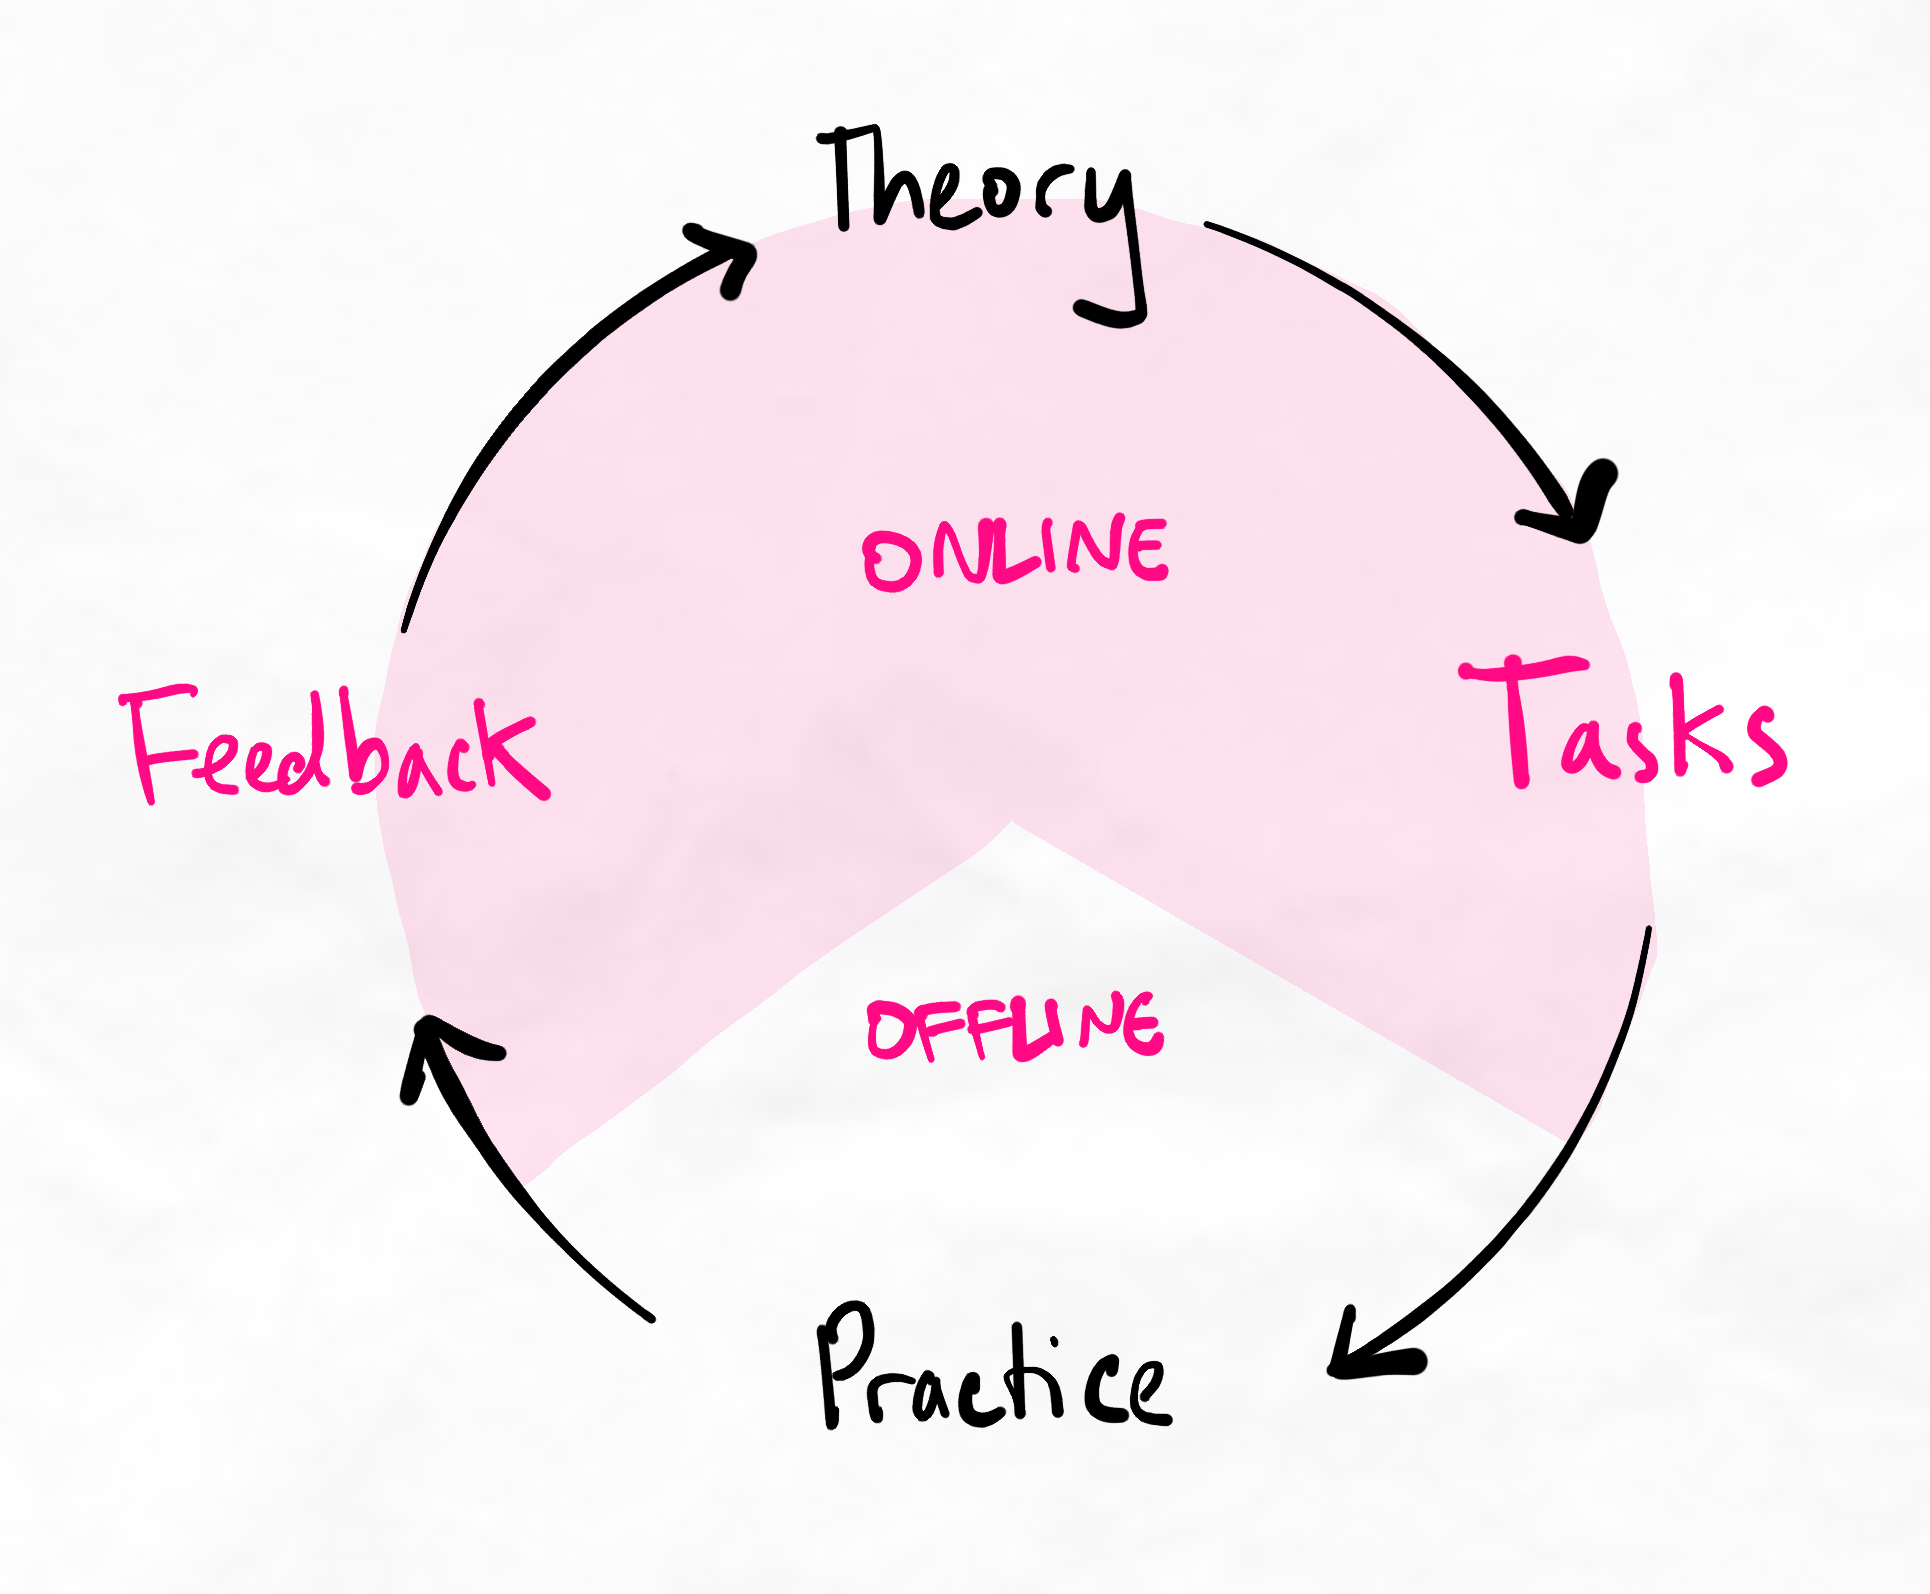 Theory leading to tasks to practice to feedback. Practice happens offline.